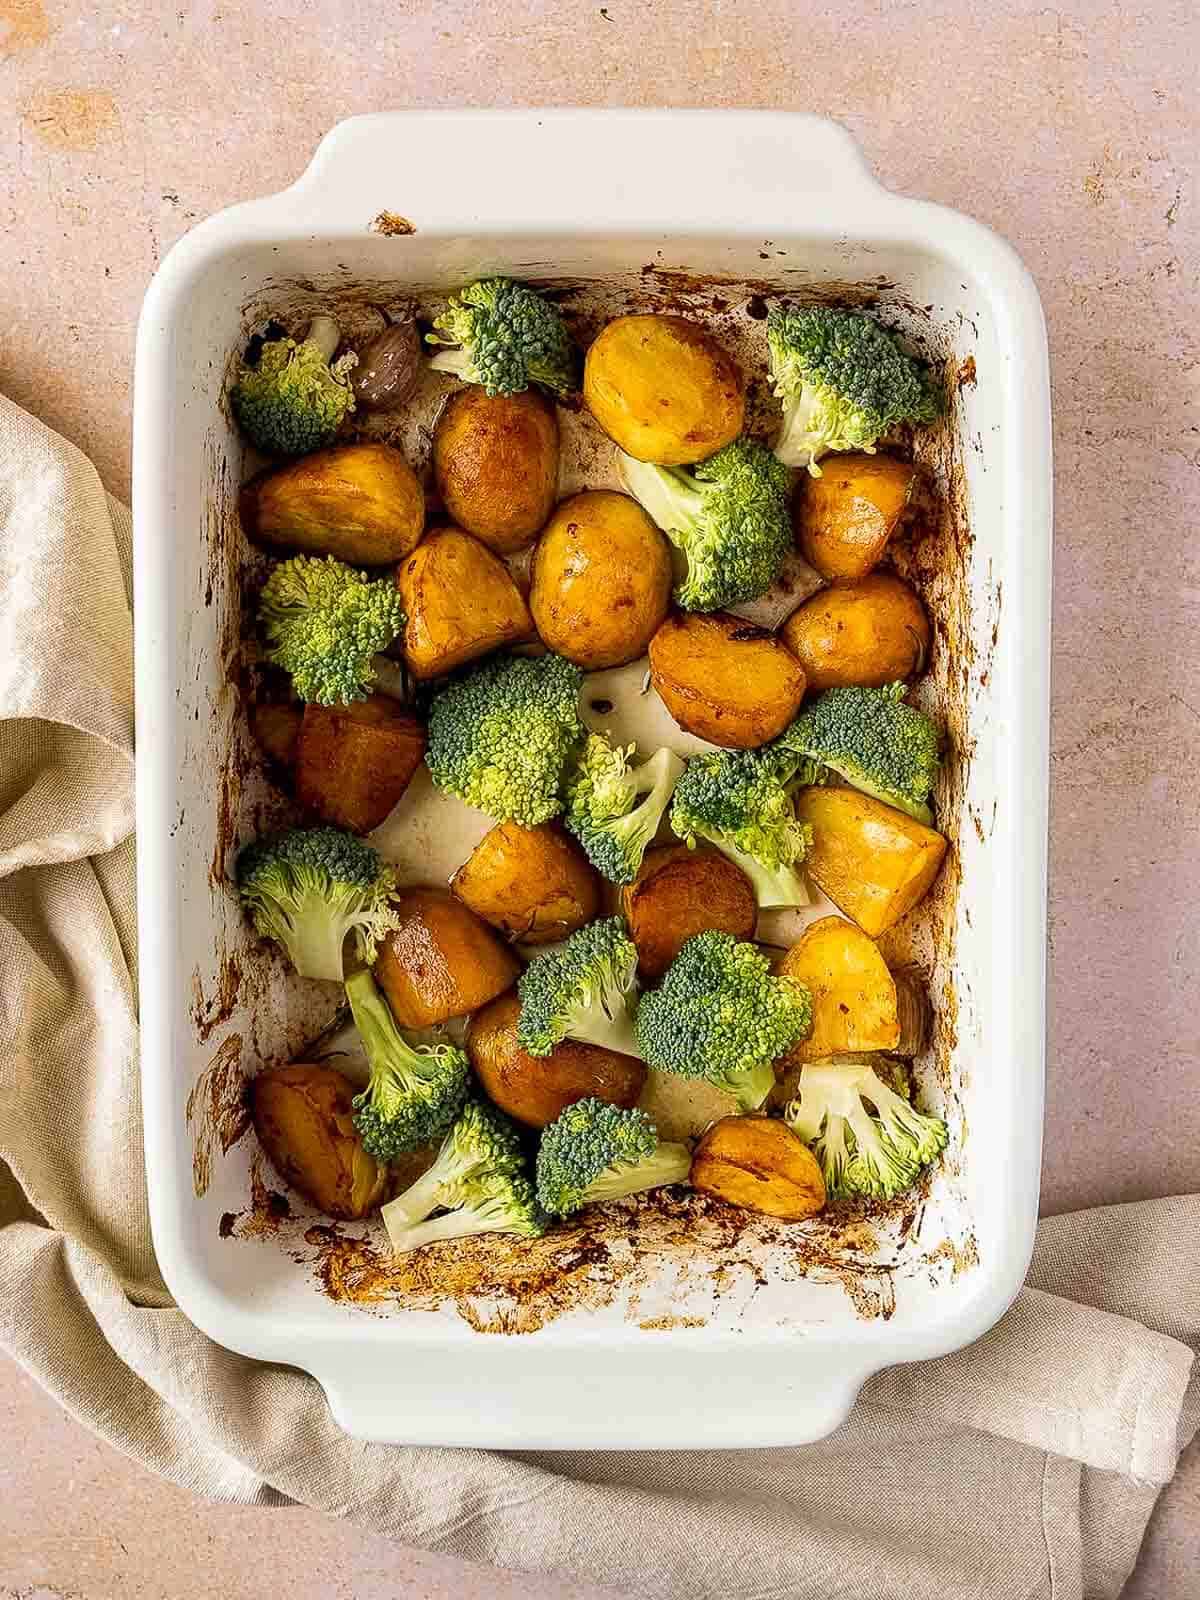 add broccoli florets to the fried potatoes.